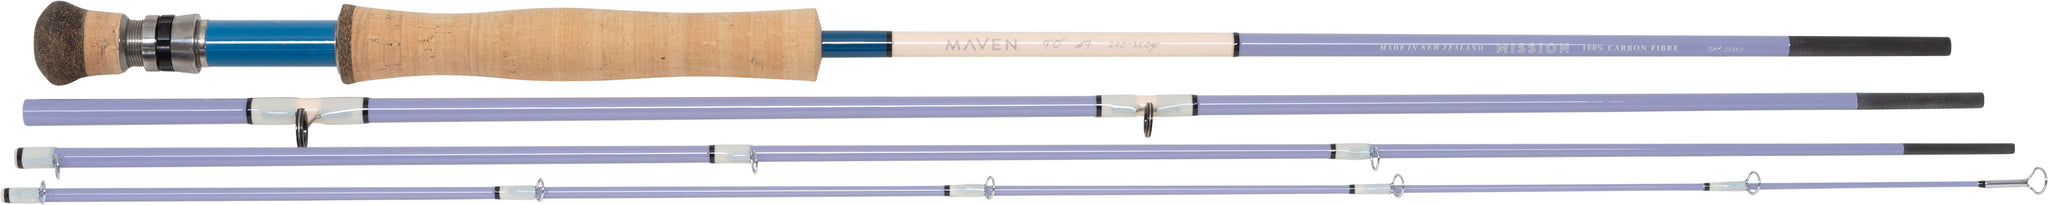 MAVEN Mission 7ft 6in Fly Fishing Rods 1 & 4 Piece for Fresh/Saltwater